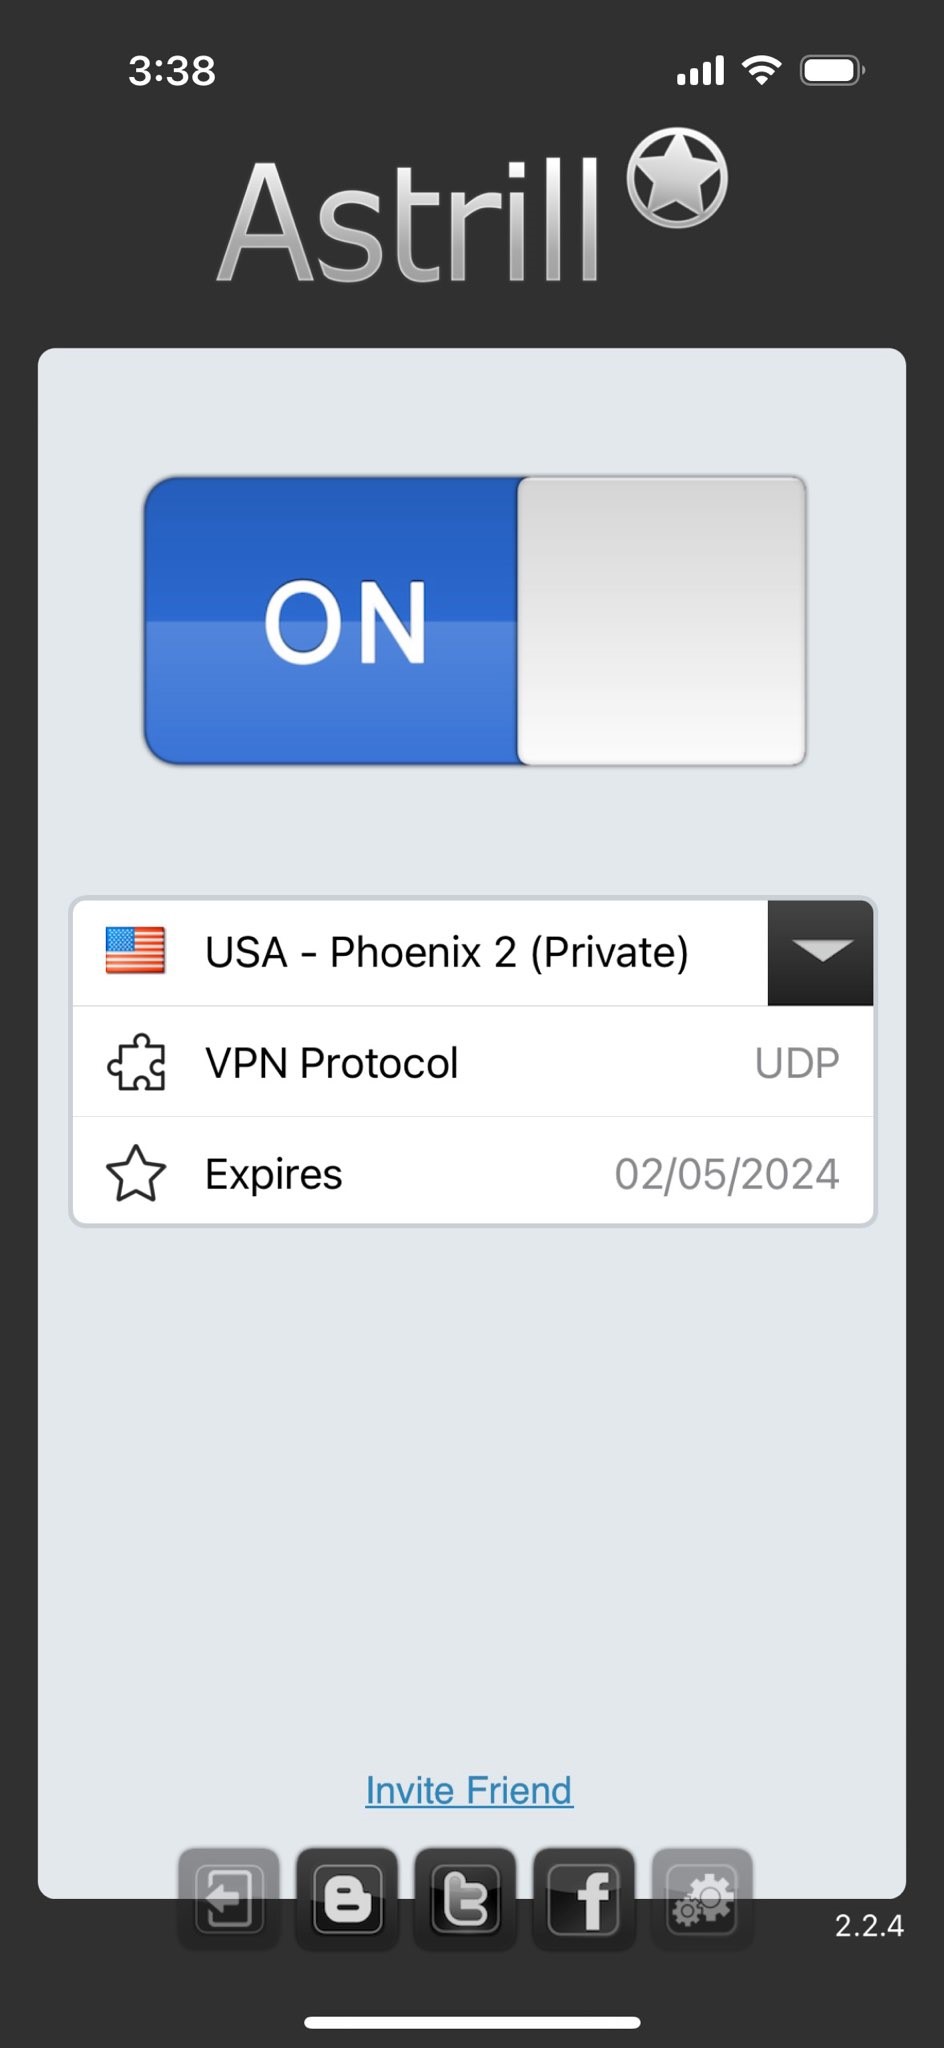 Connect to the AstrillVPN